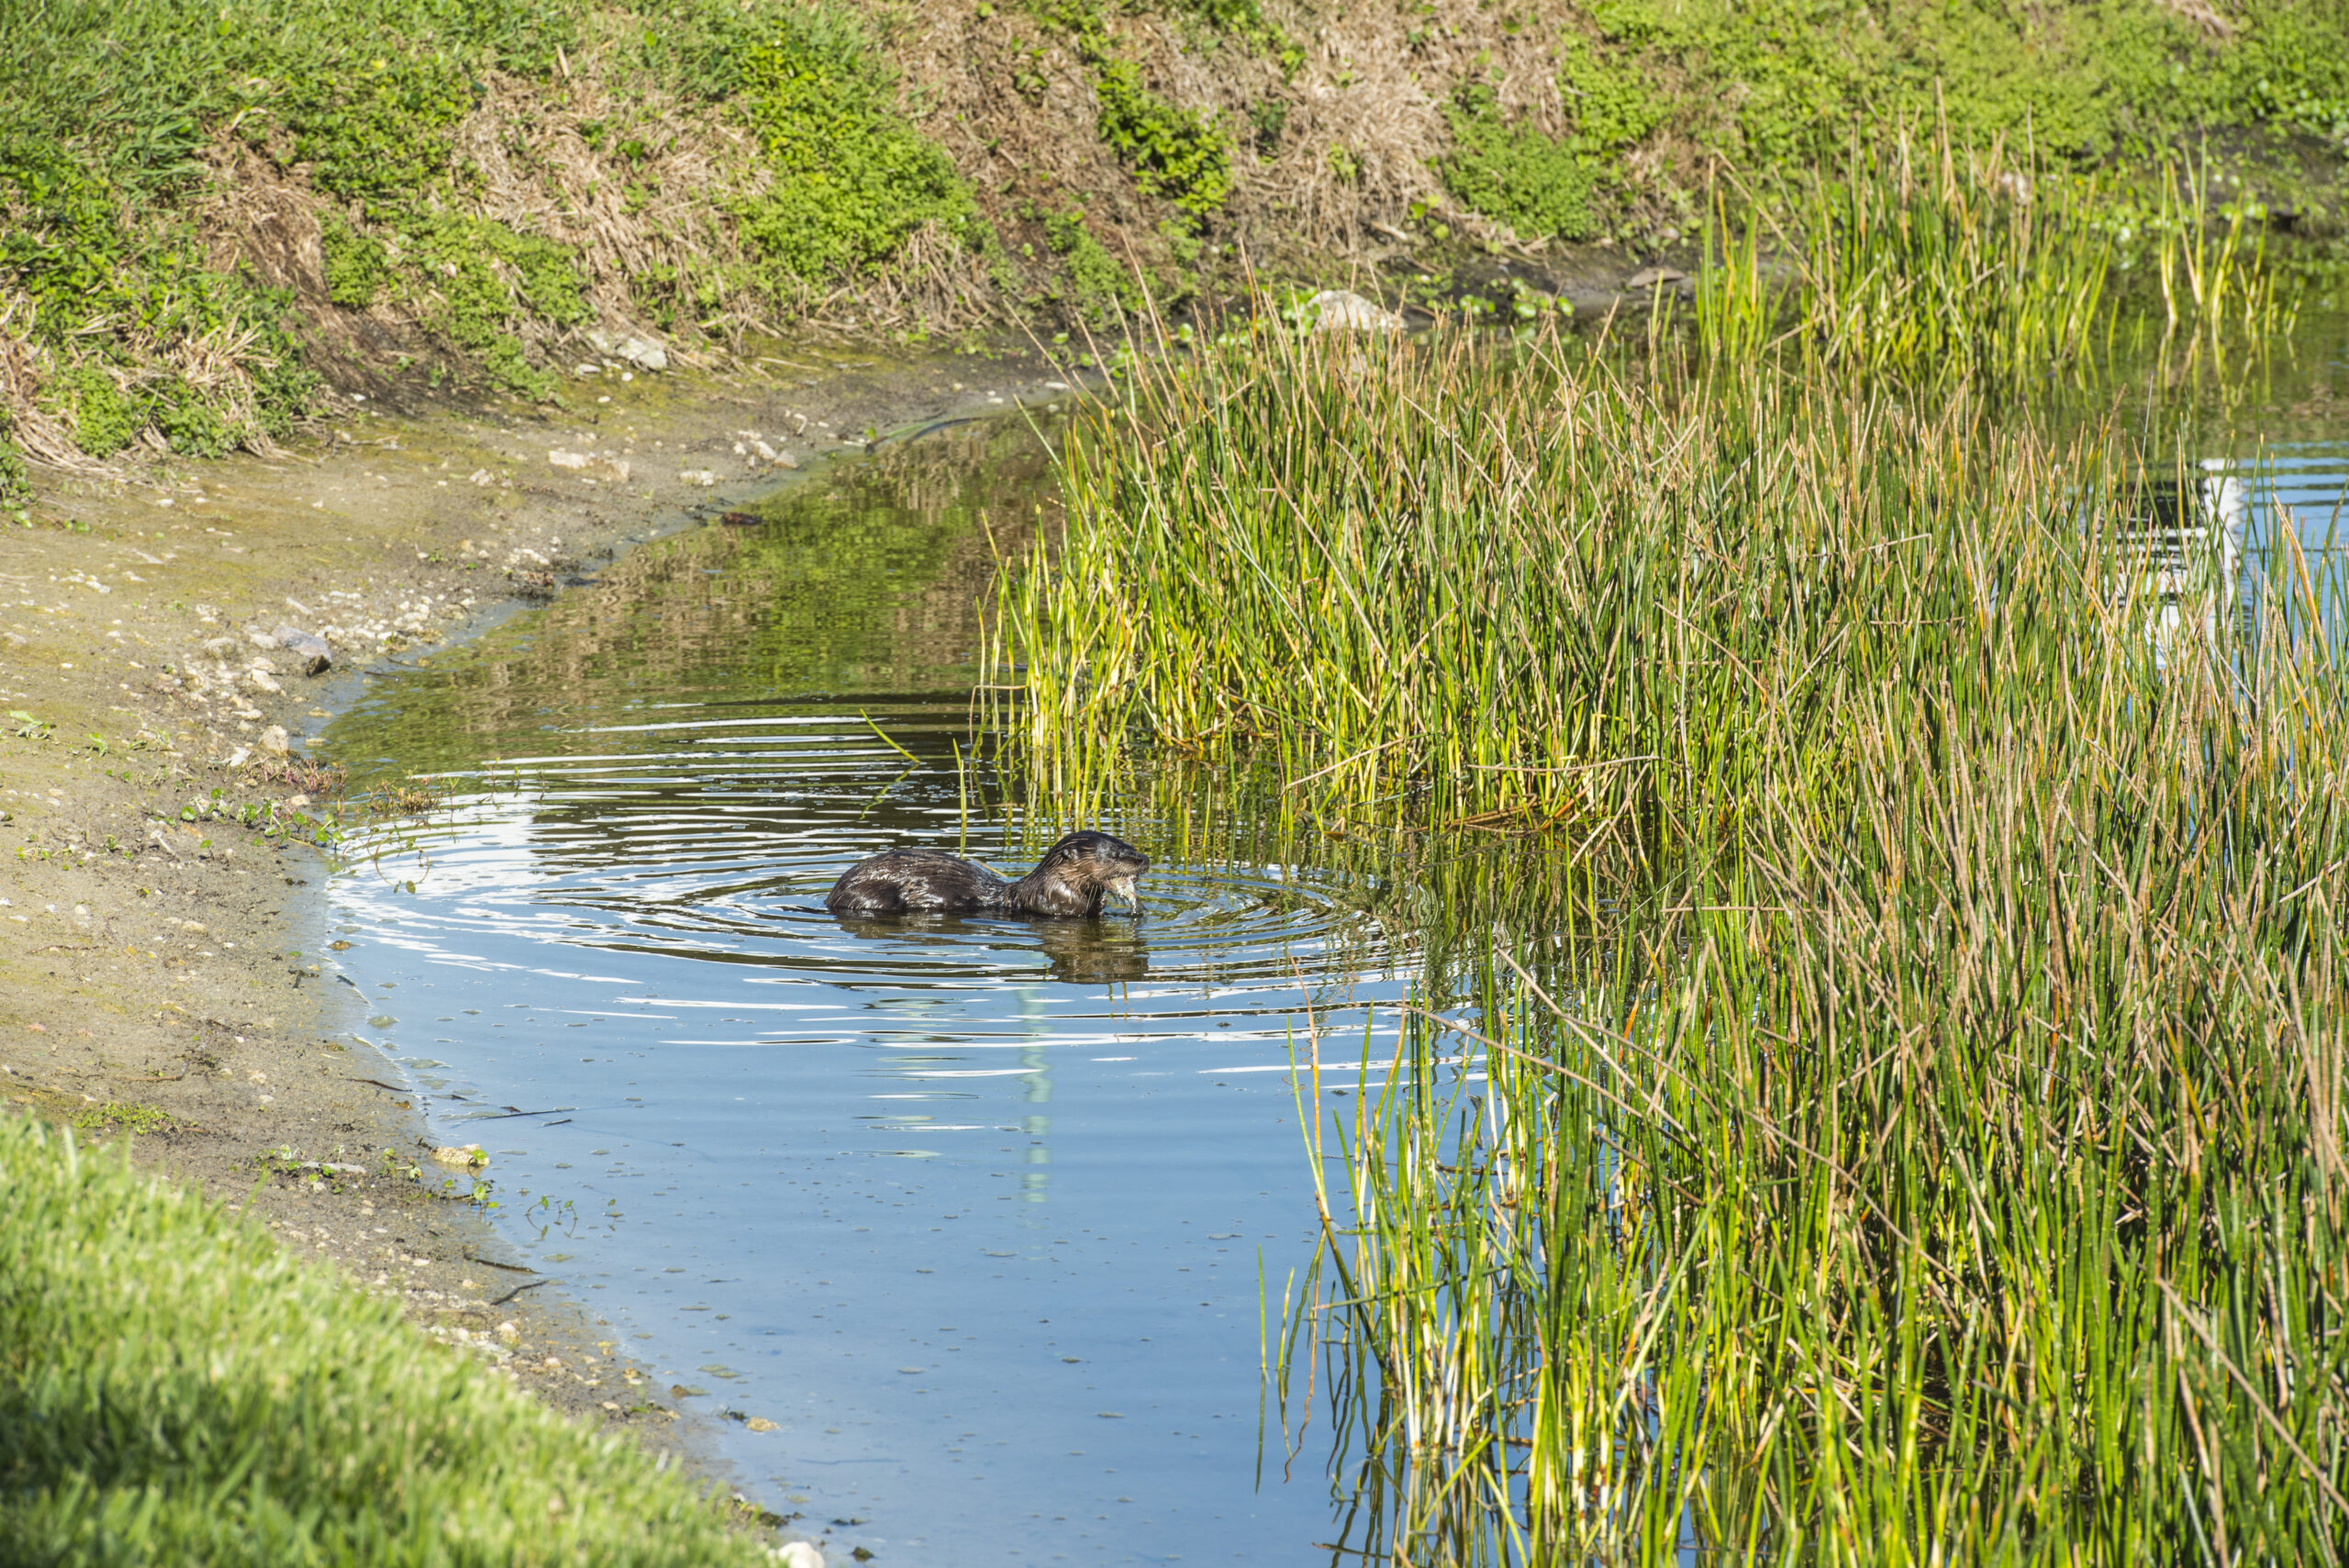 Shell Point offers a welcoming environment for otters and an array of wildlife